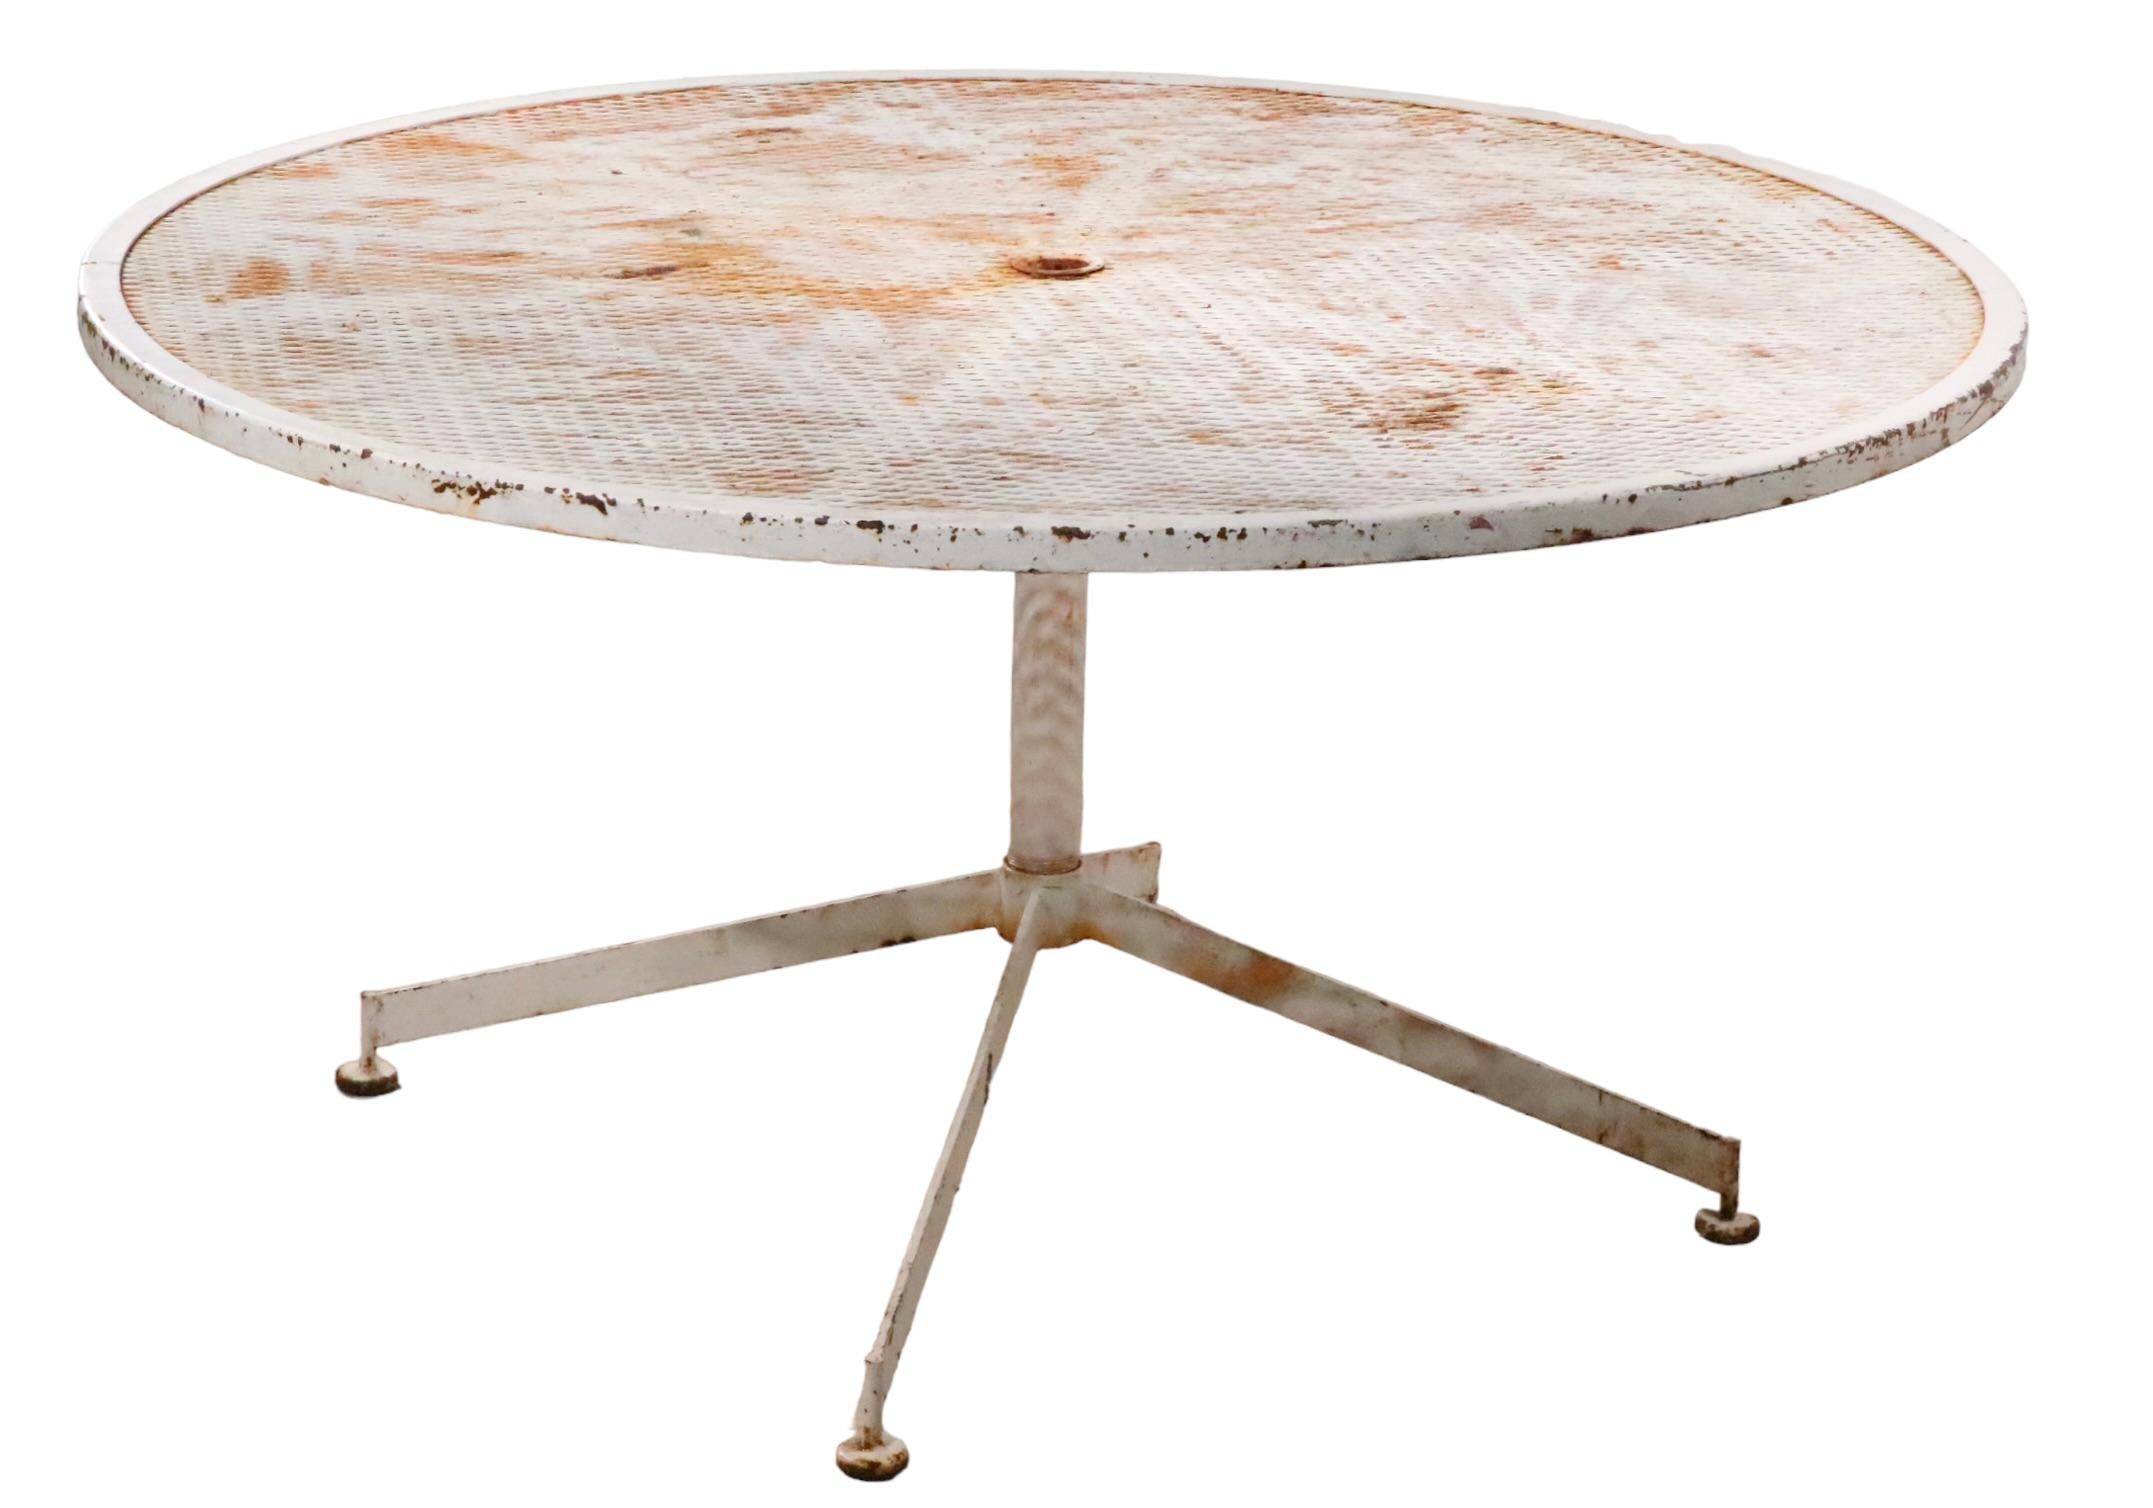 Architectural midcentury garden, patio, poolside dining table having a metal base, with metal mesh top. This chic table features a circular top, with a pedestal center post, and four radiating legs at the base. The table is structurally sound, and